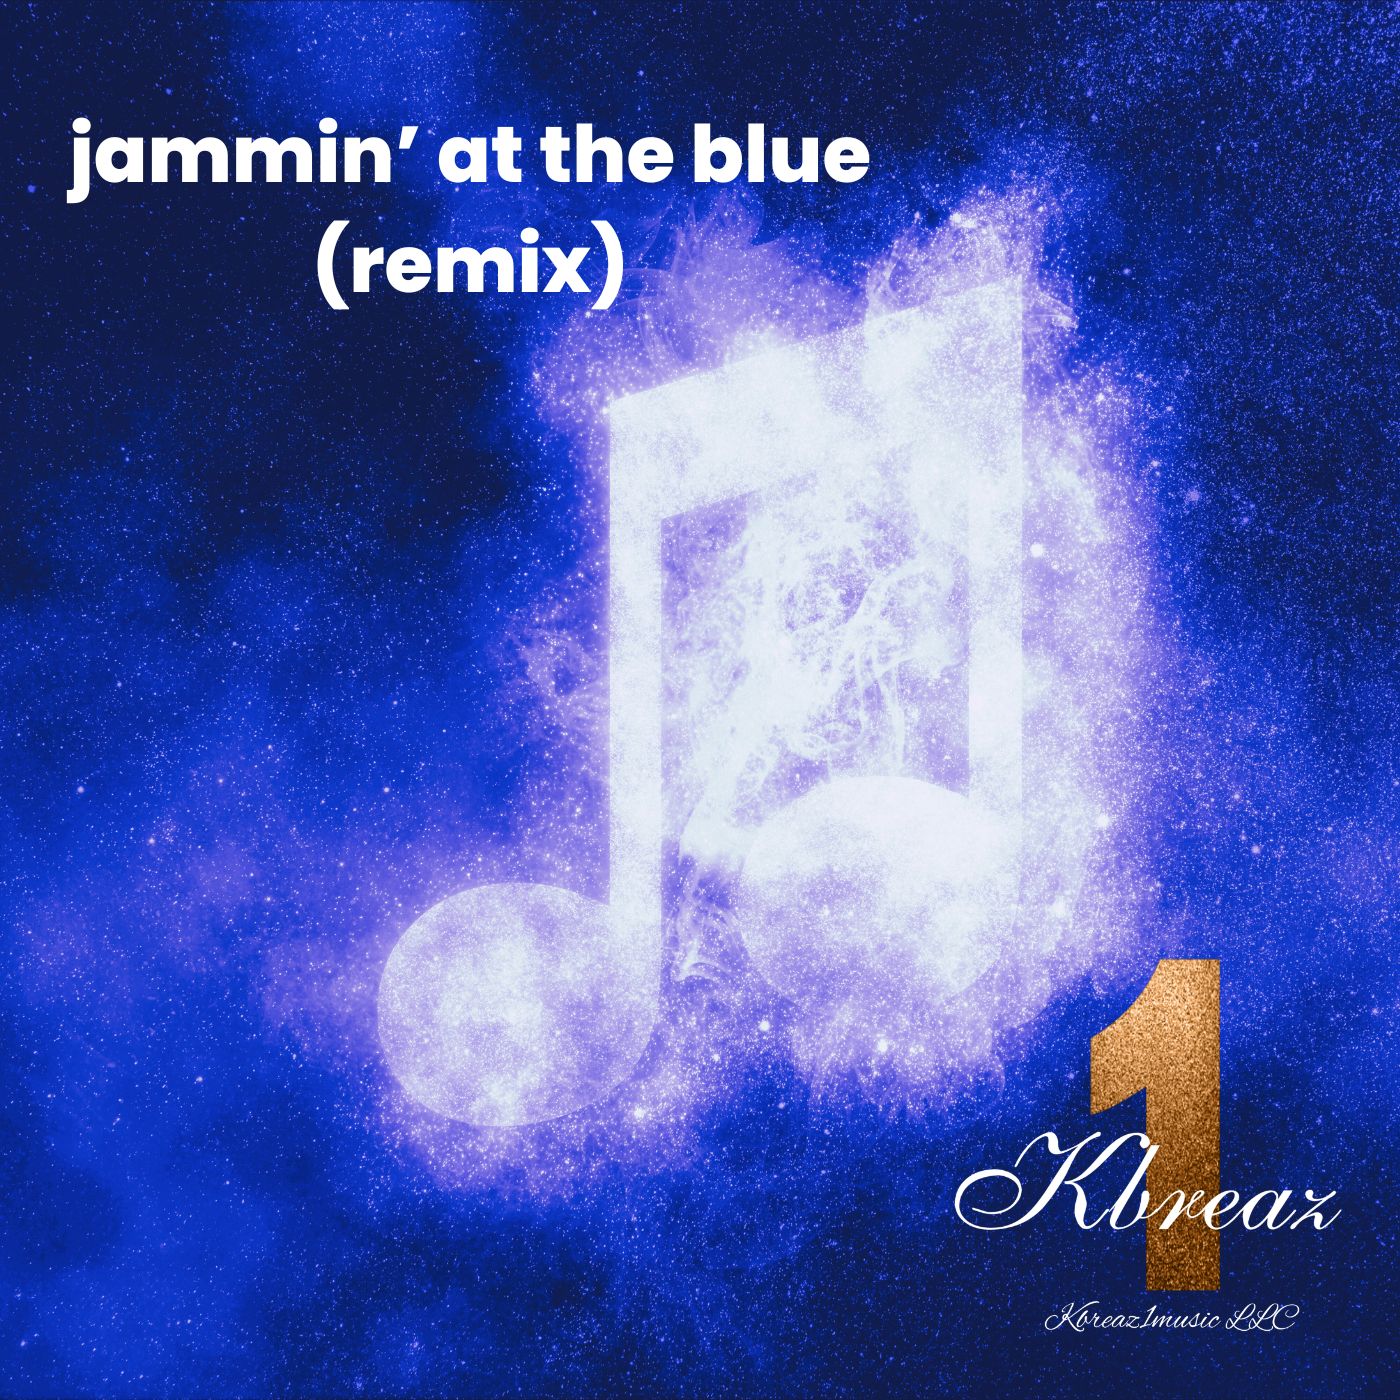 Art for Jammin' at the Blue (Remix) by Kbreaz1